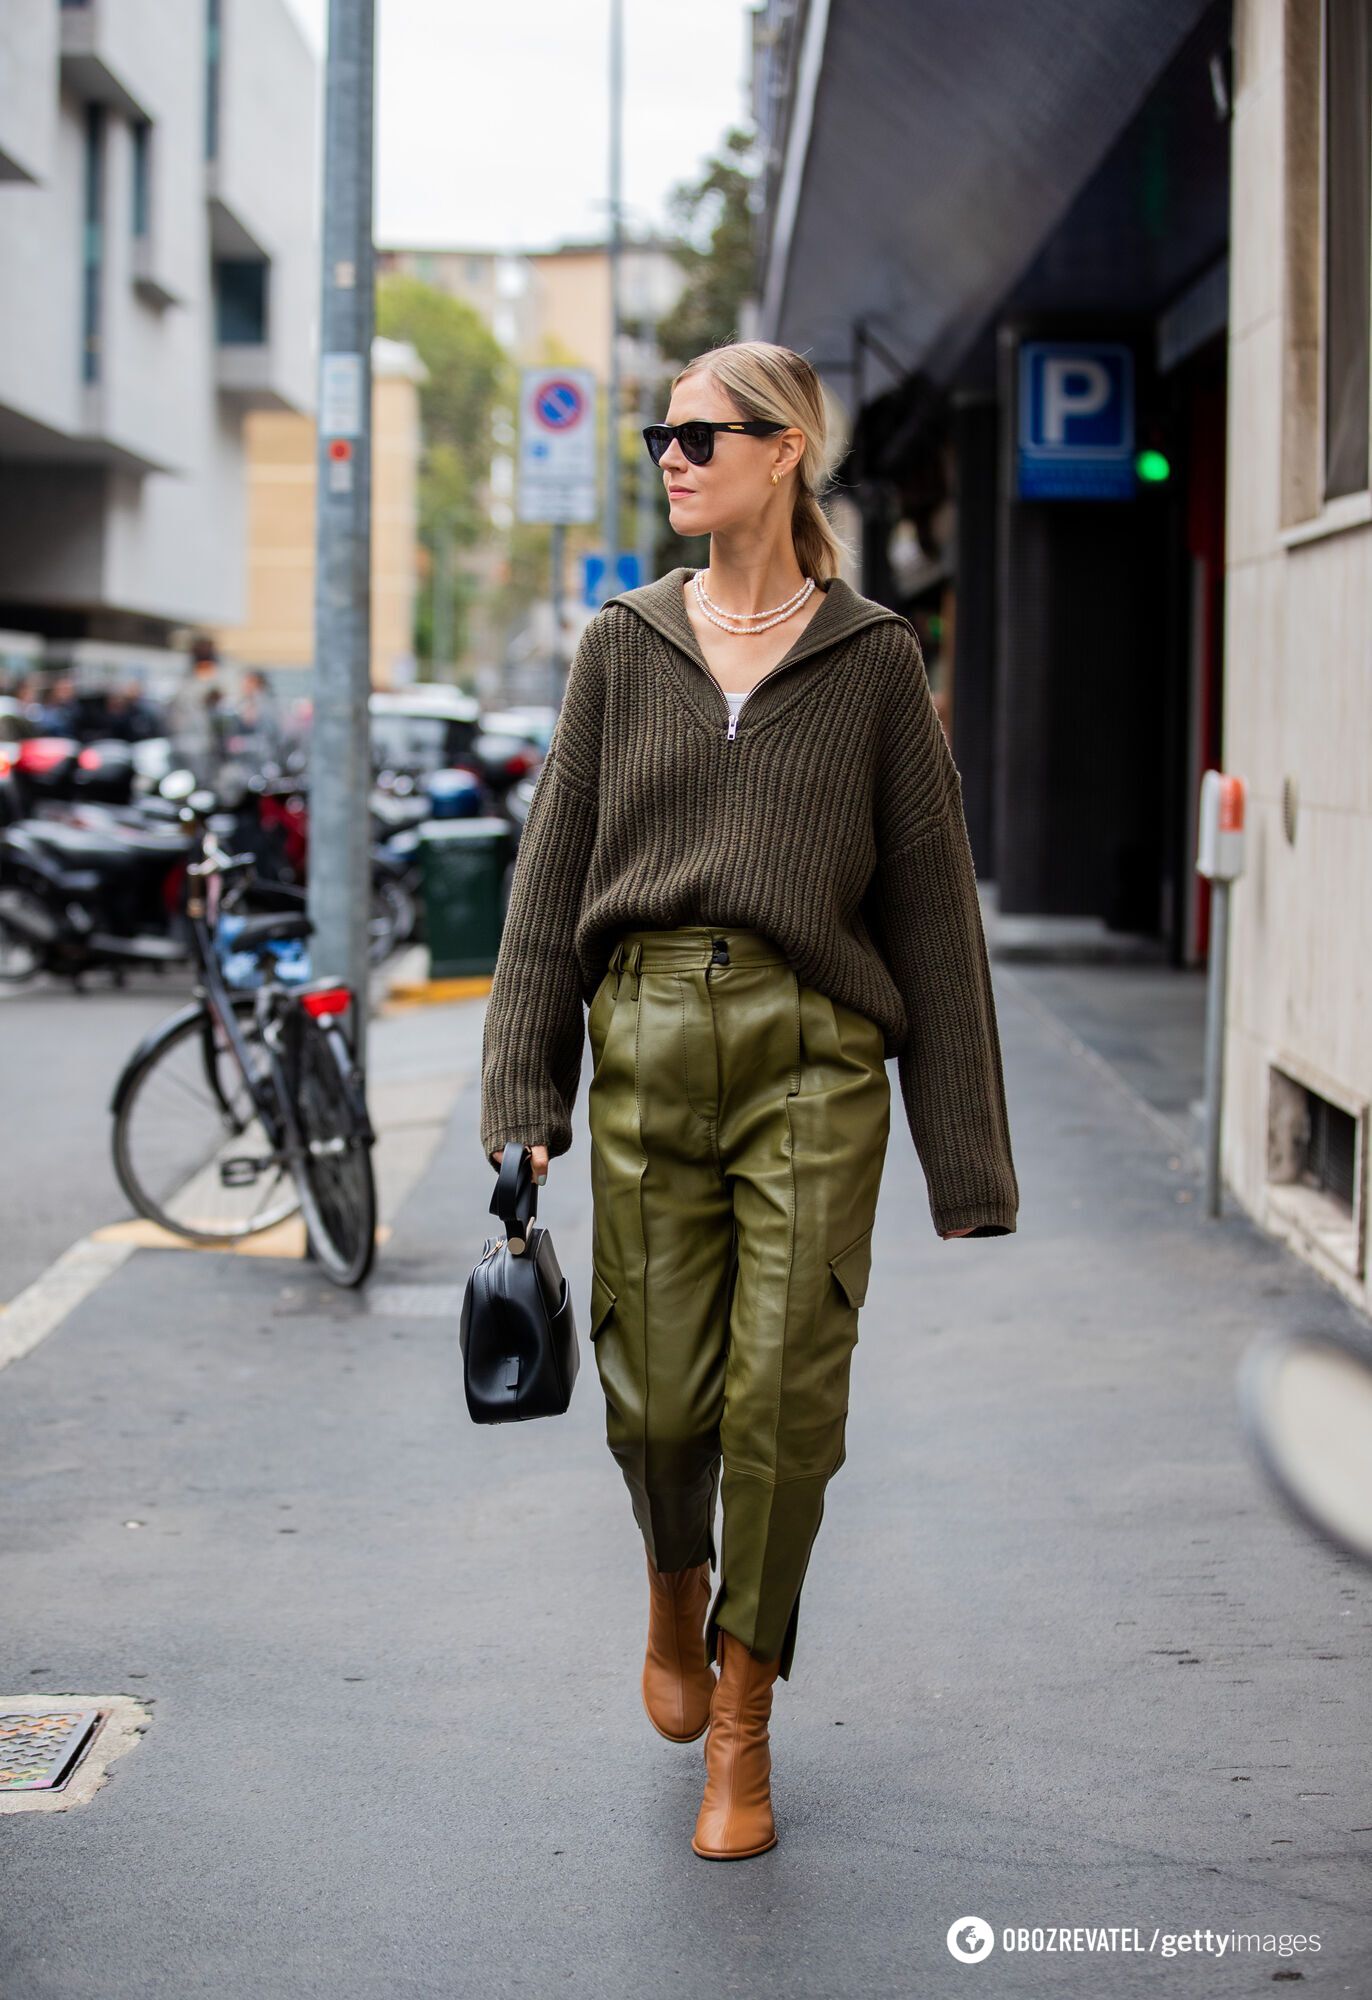 Stylish and cozy: 5 interesting ideas for what to wear with an oversized sweater